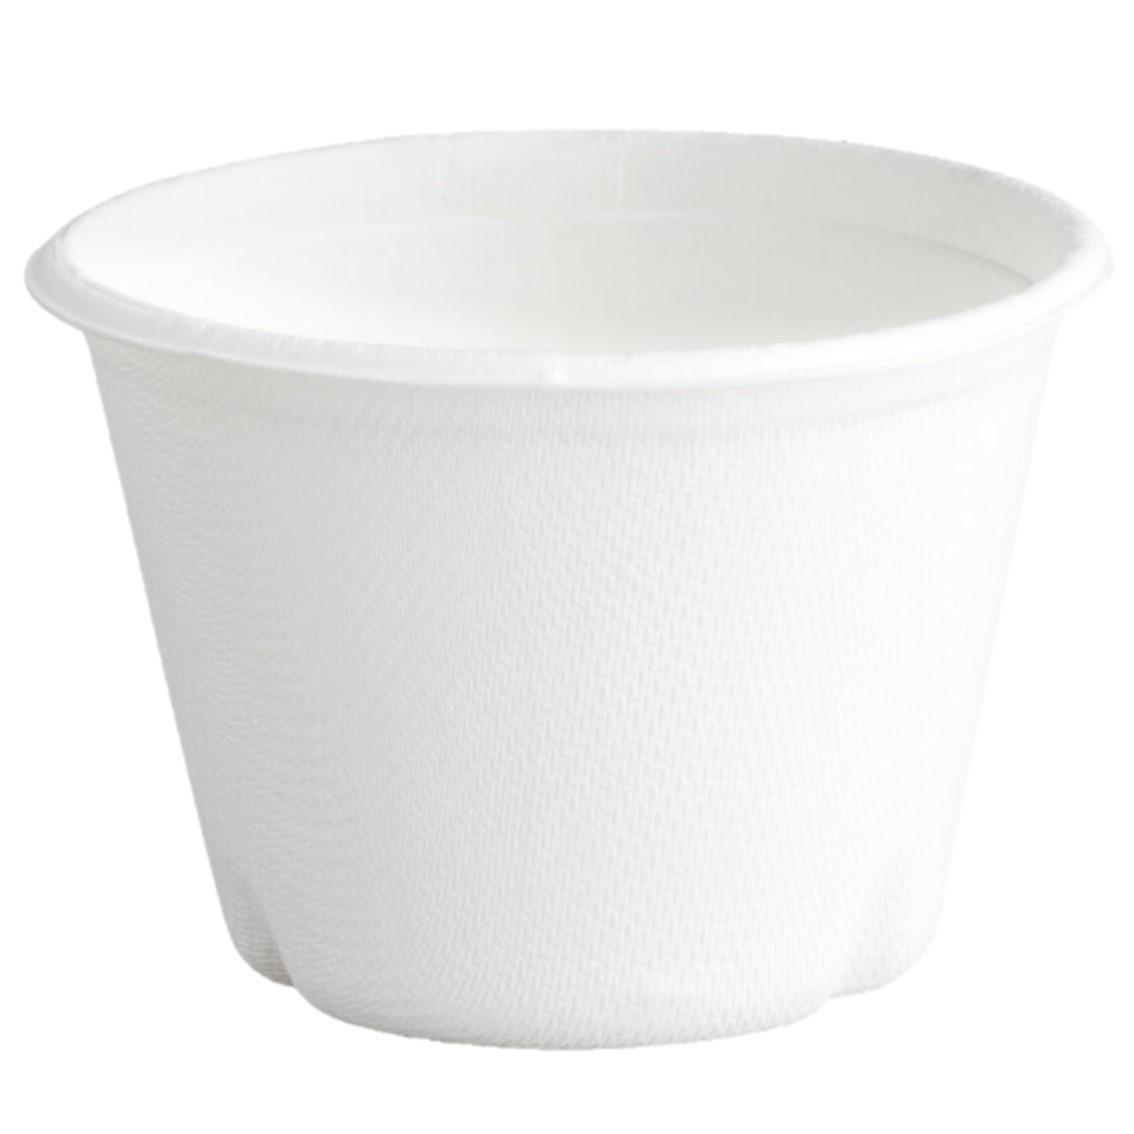 Compostable disposable food bowls for all types of events with direct food 